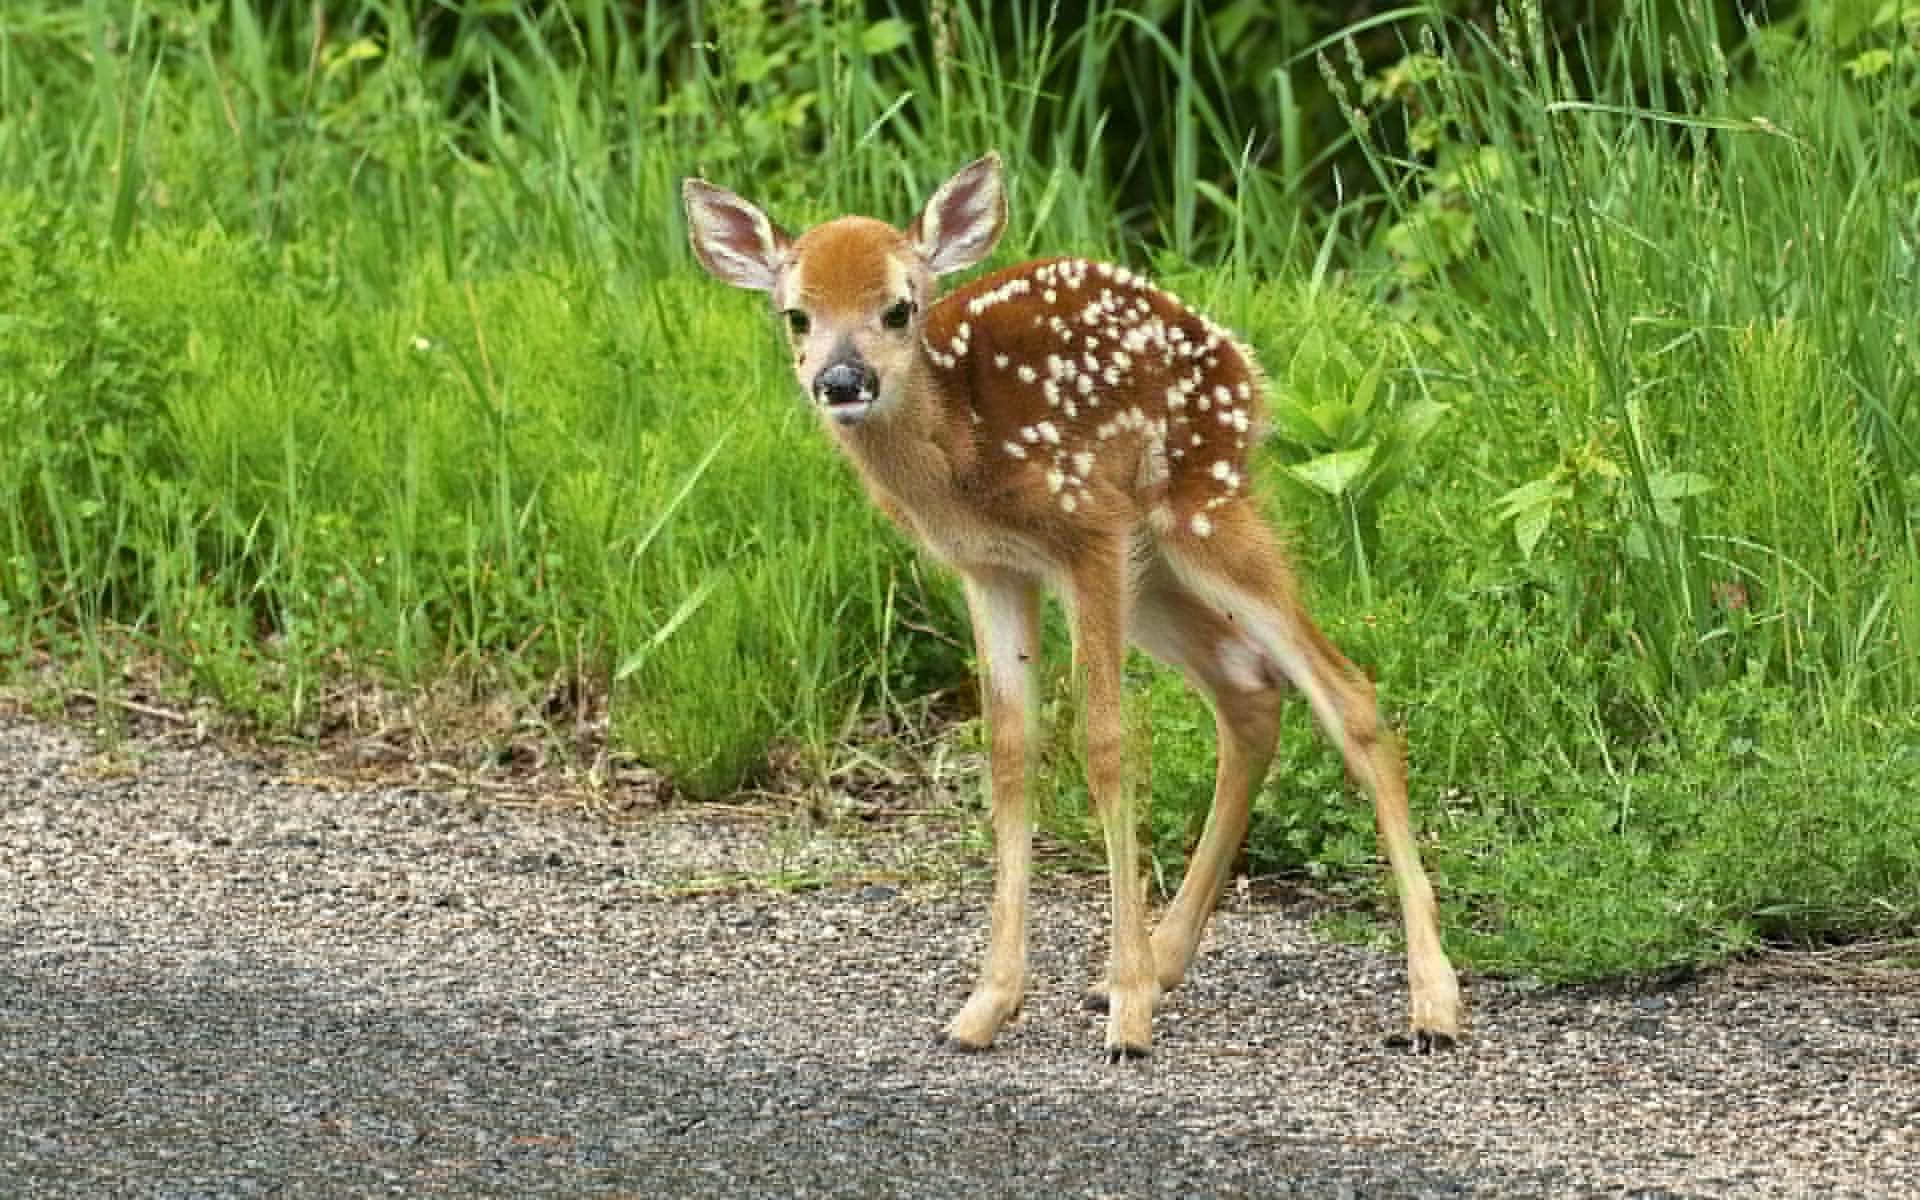 7/12/16- 3 Facts You Need to Know About Fawns